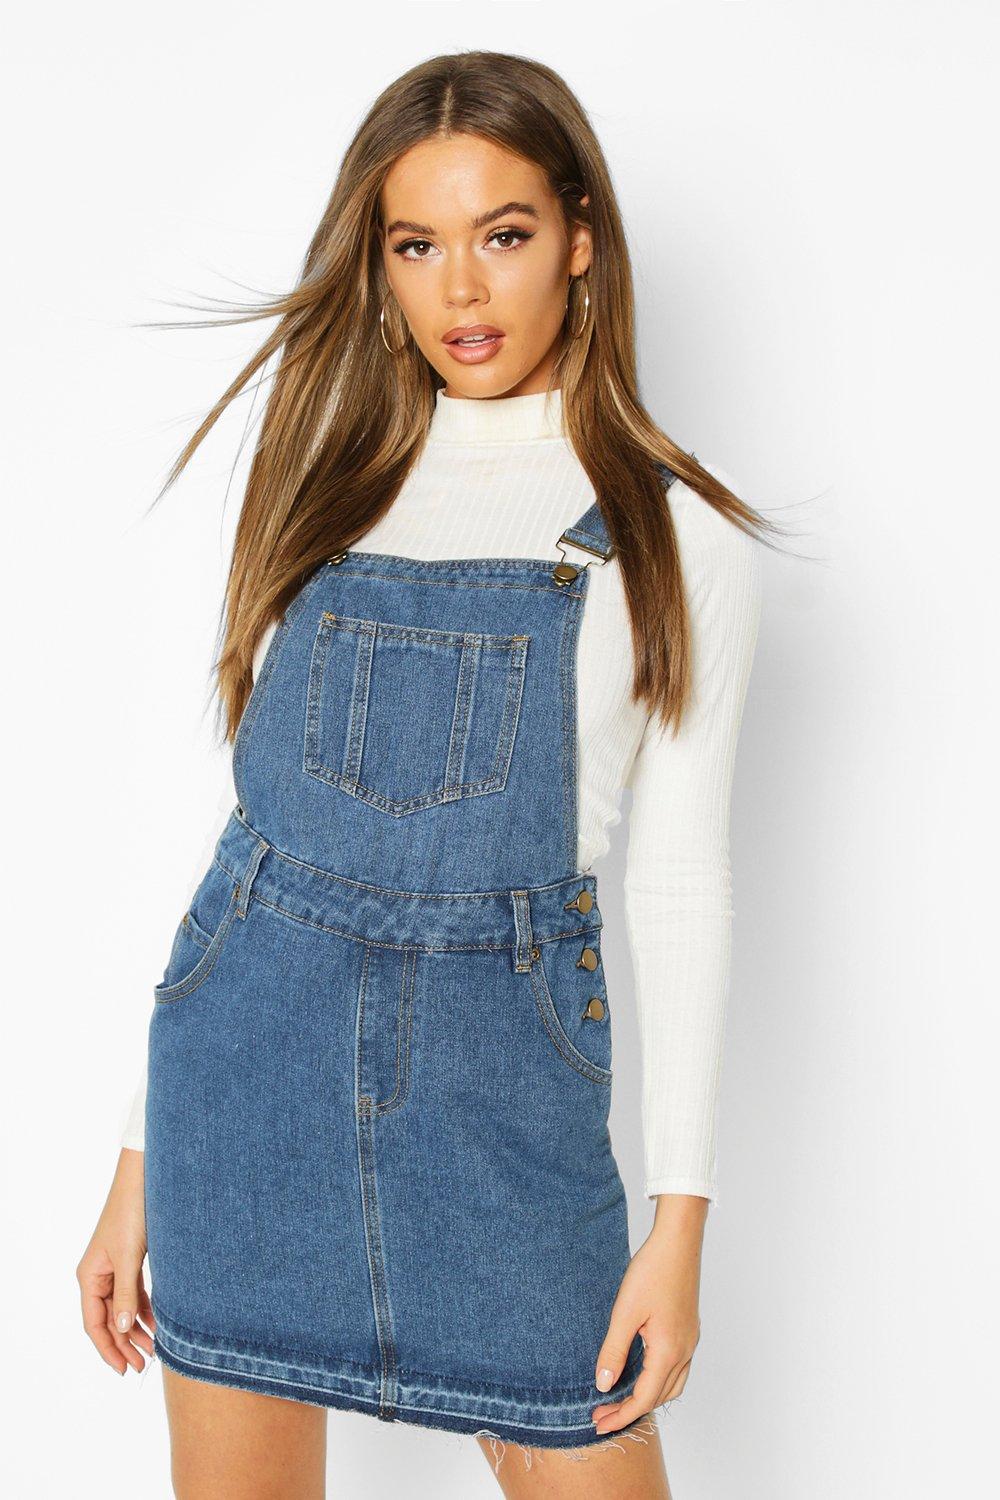 pinafore dress jeans